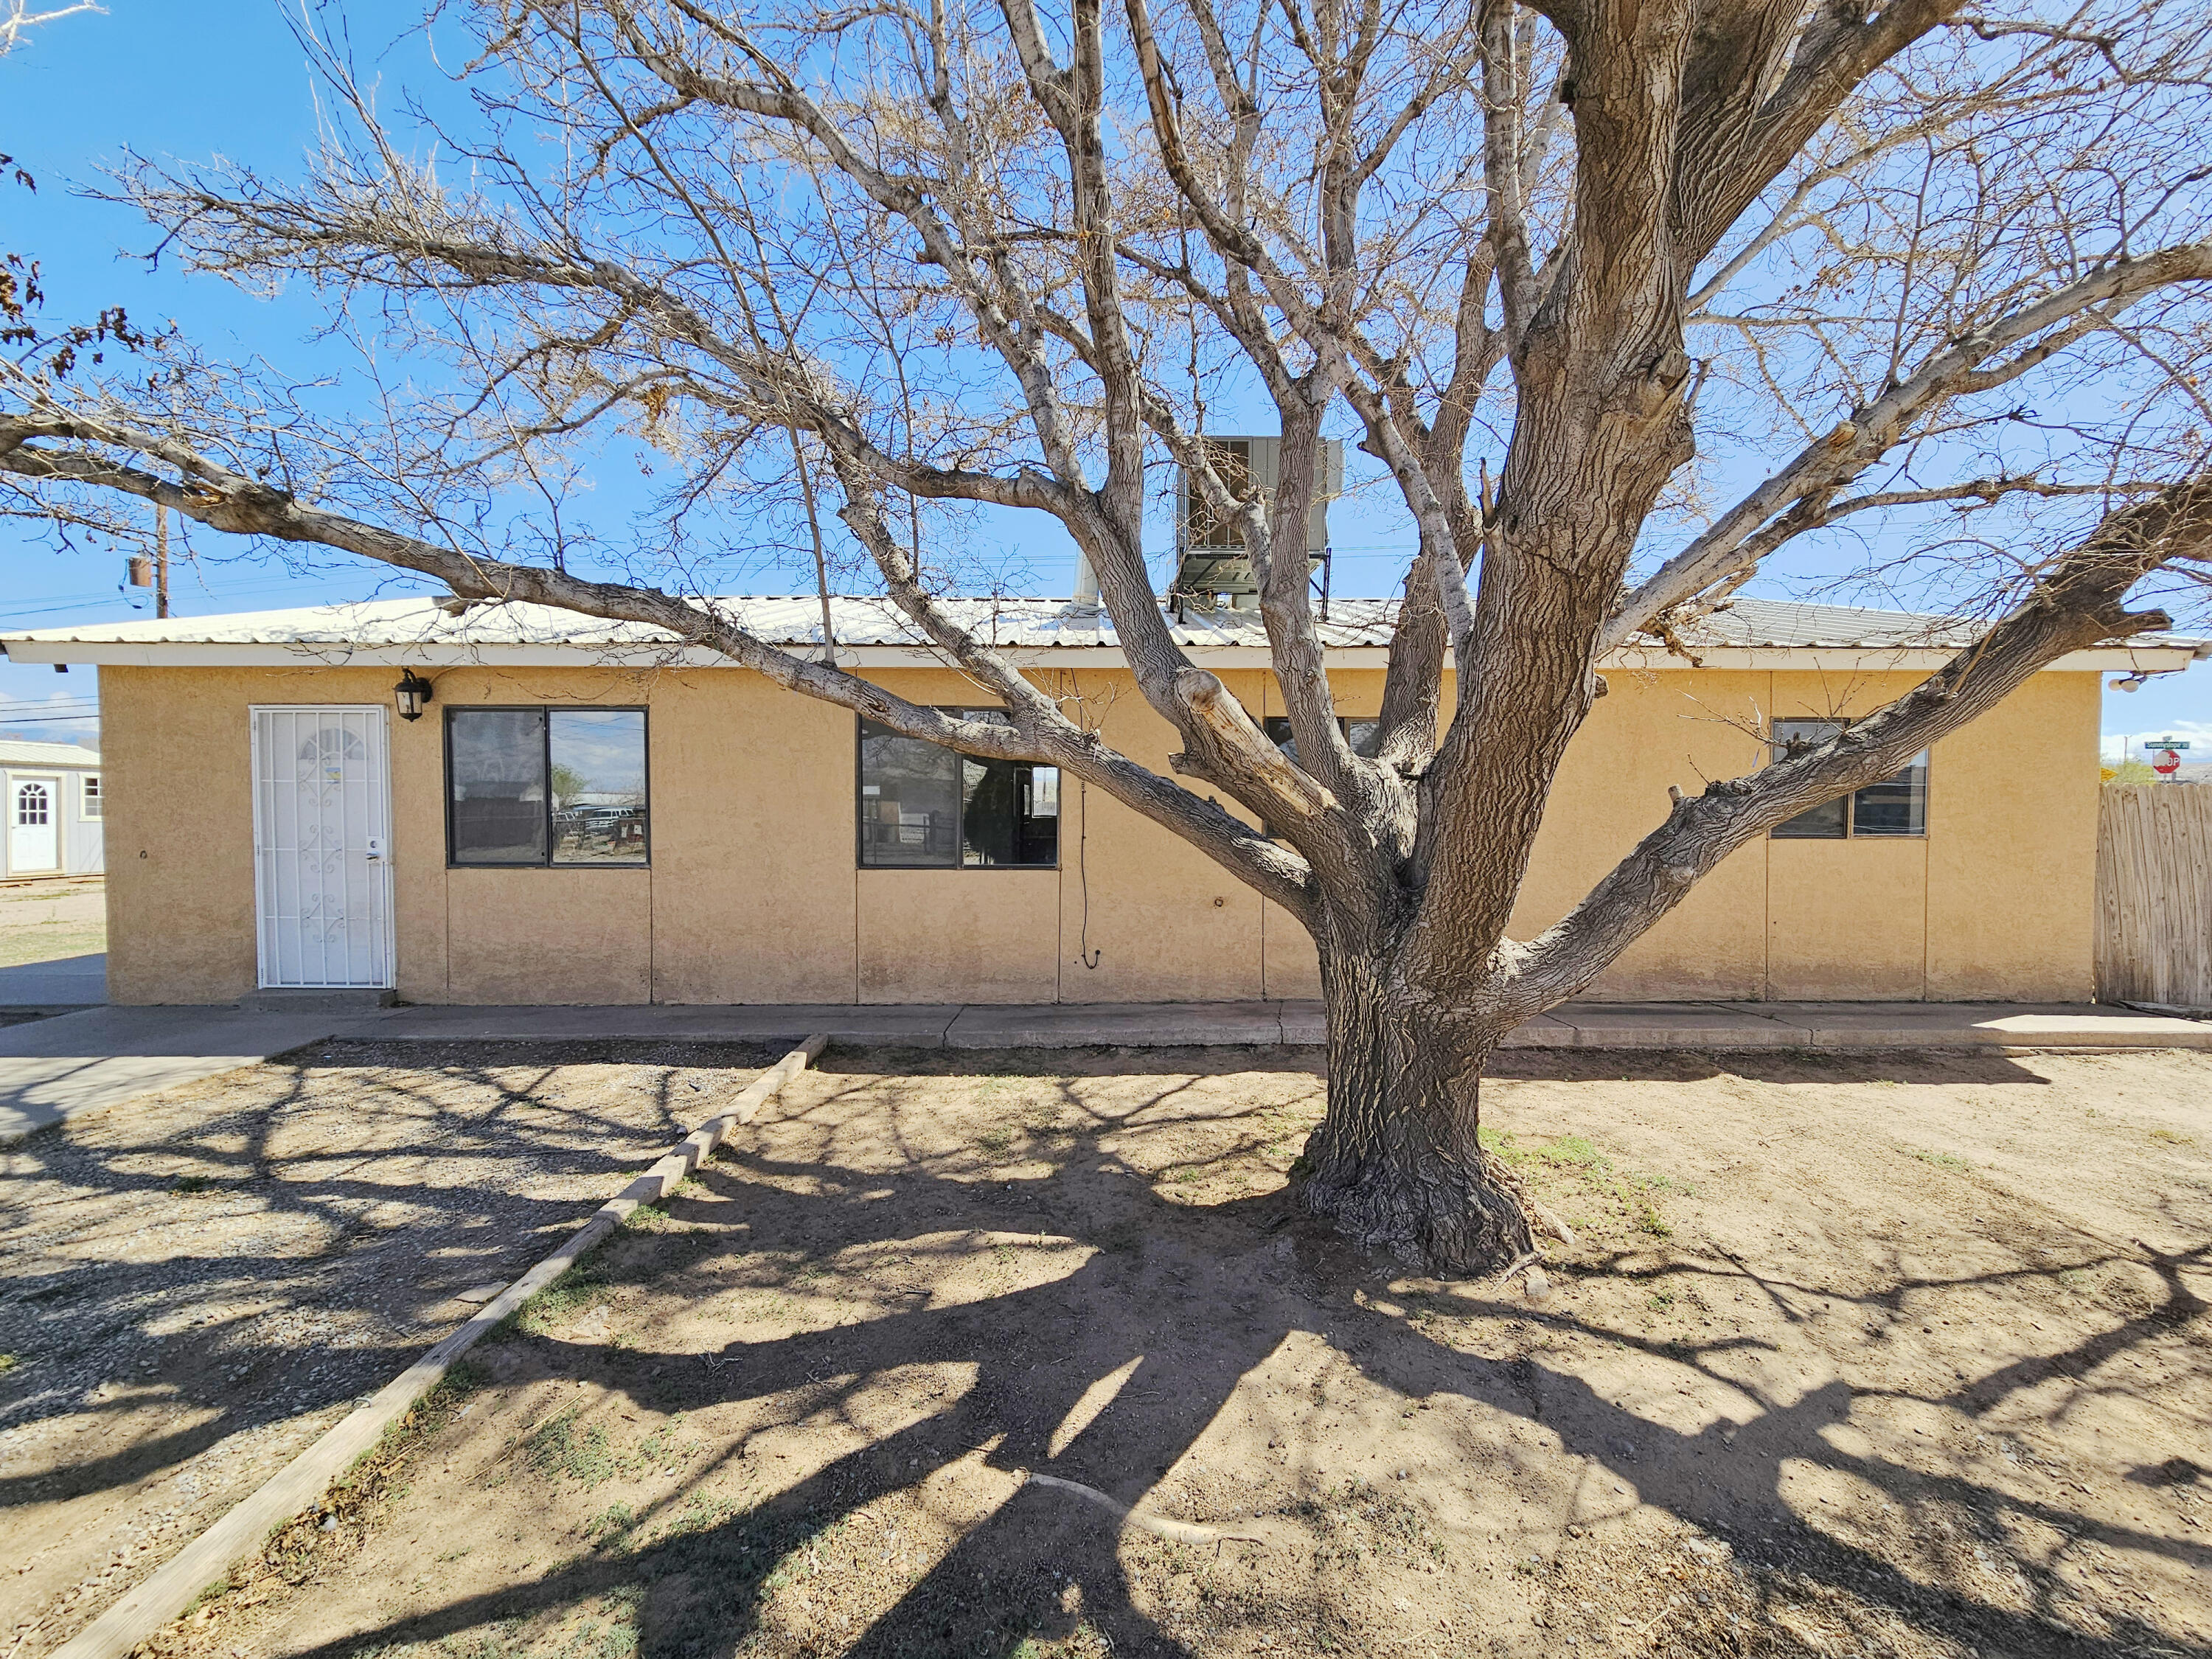 4801 2nd Street SW, Albuquerque, New Mexico 87105, 4 Bedrooms Bedrooms, ,2 BathroomsBathrooms,Residential,For Sale,4801 2nd Street SW,1062021